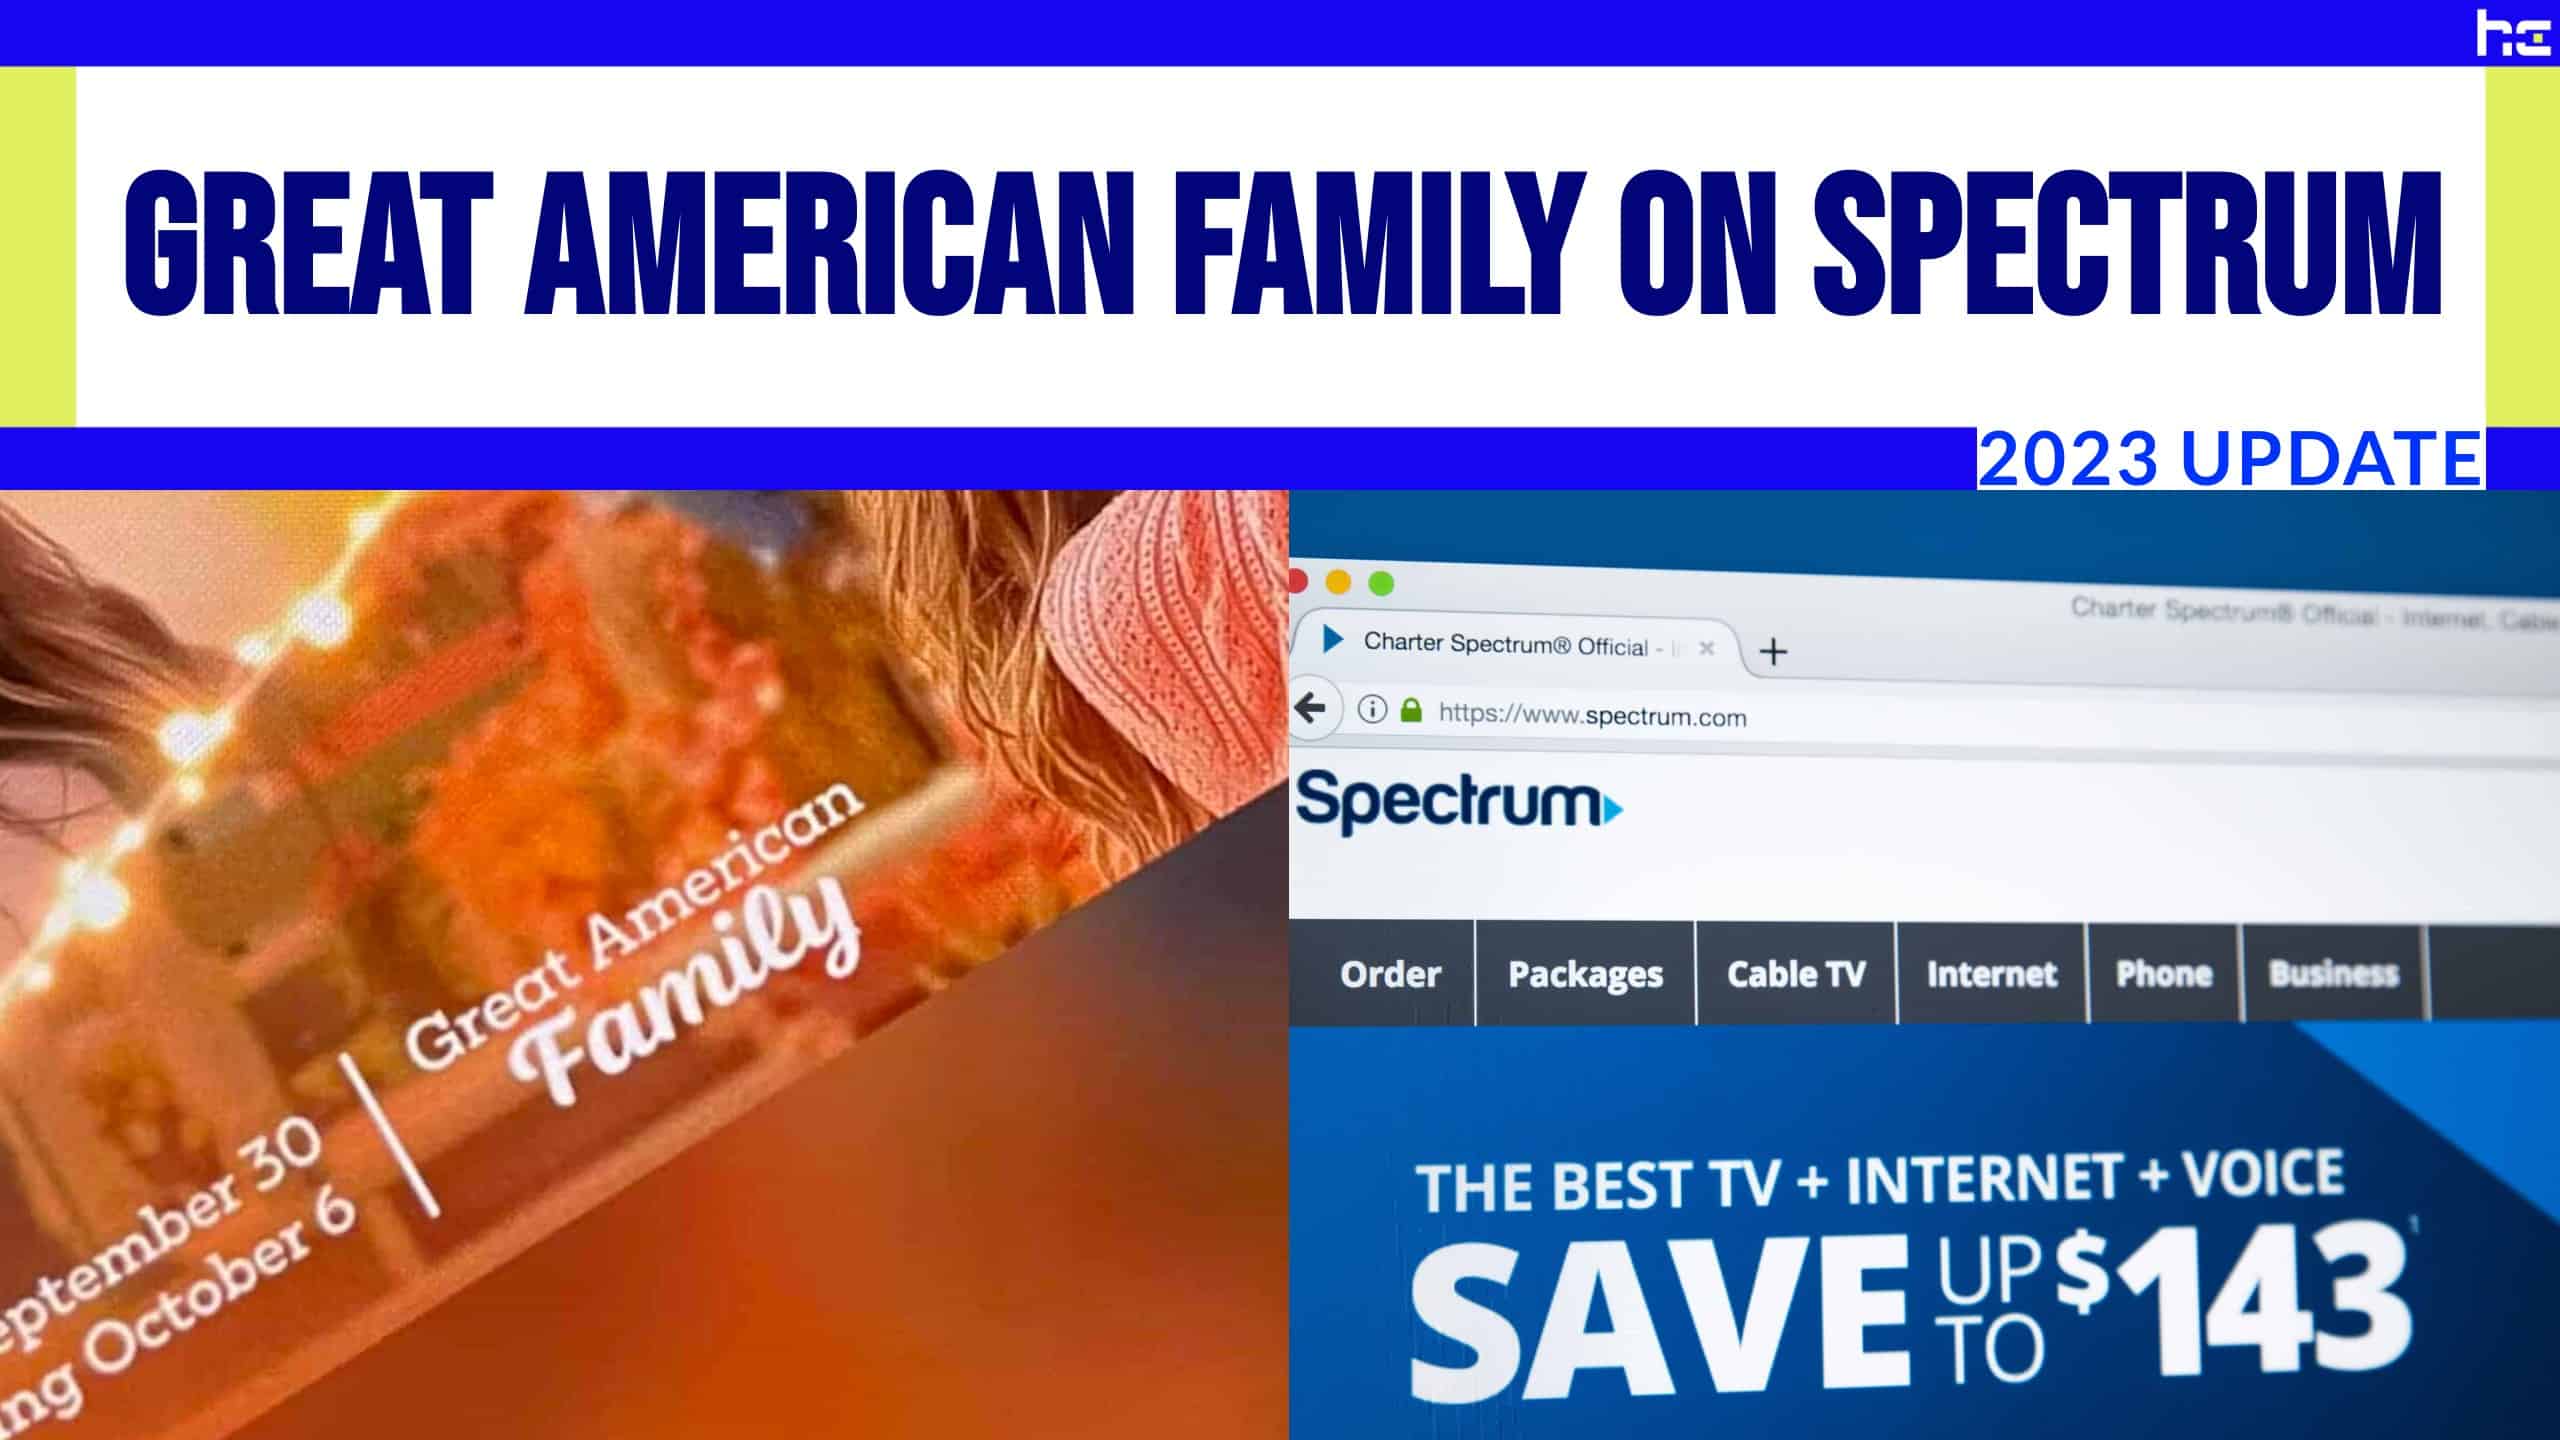 Great American Family and Spectrum logos side by side.